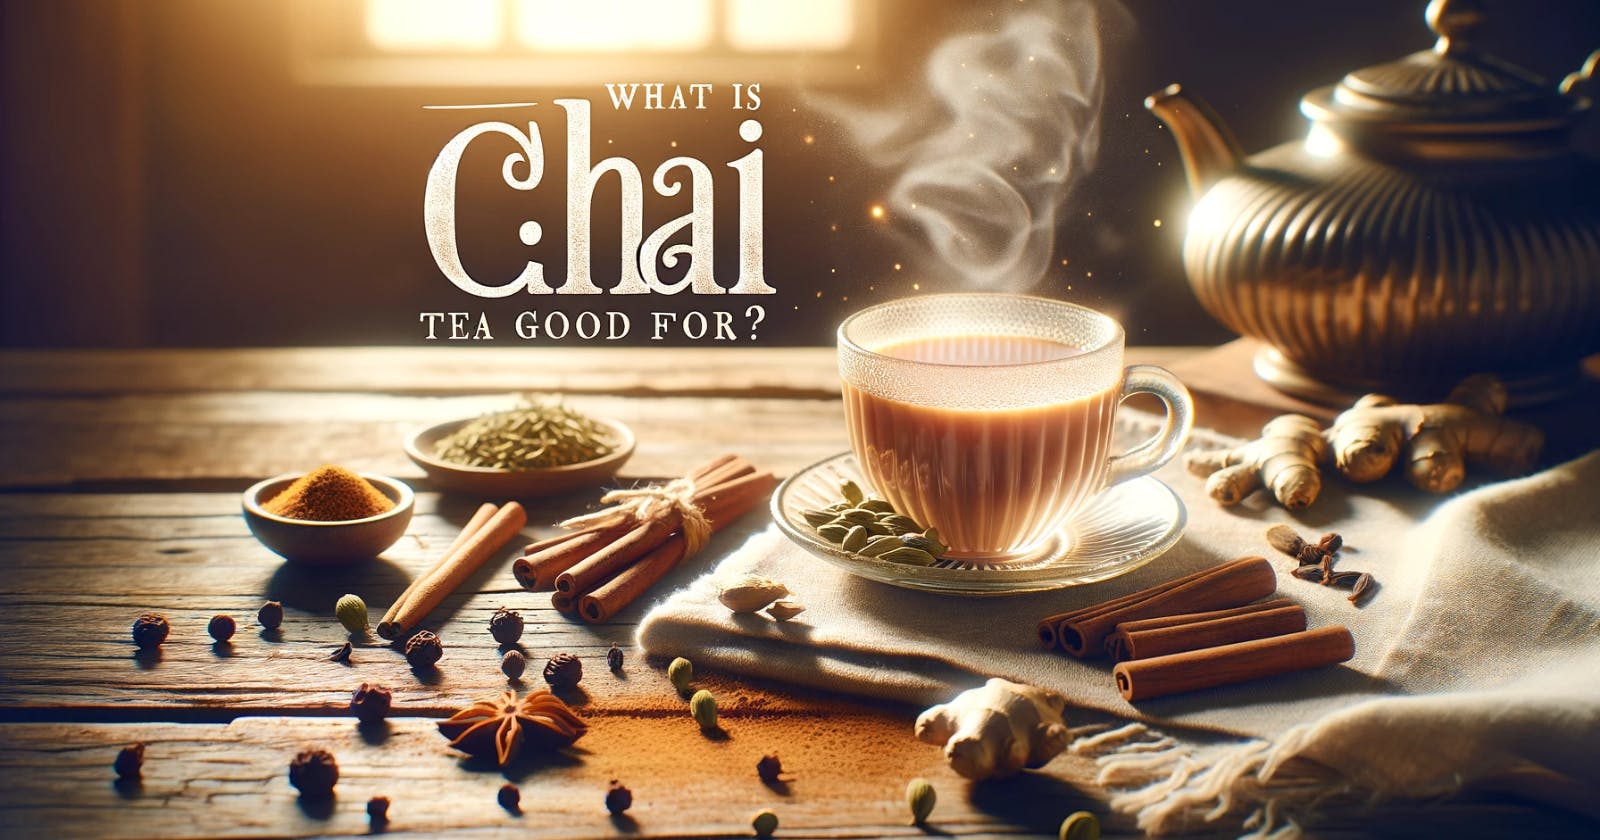 What is Chai Tea Good For?